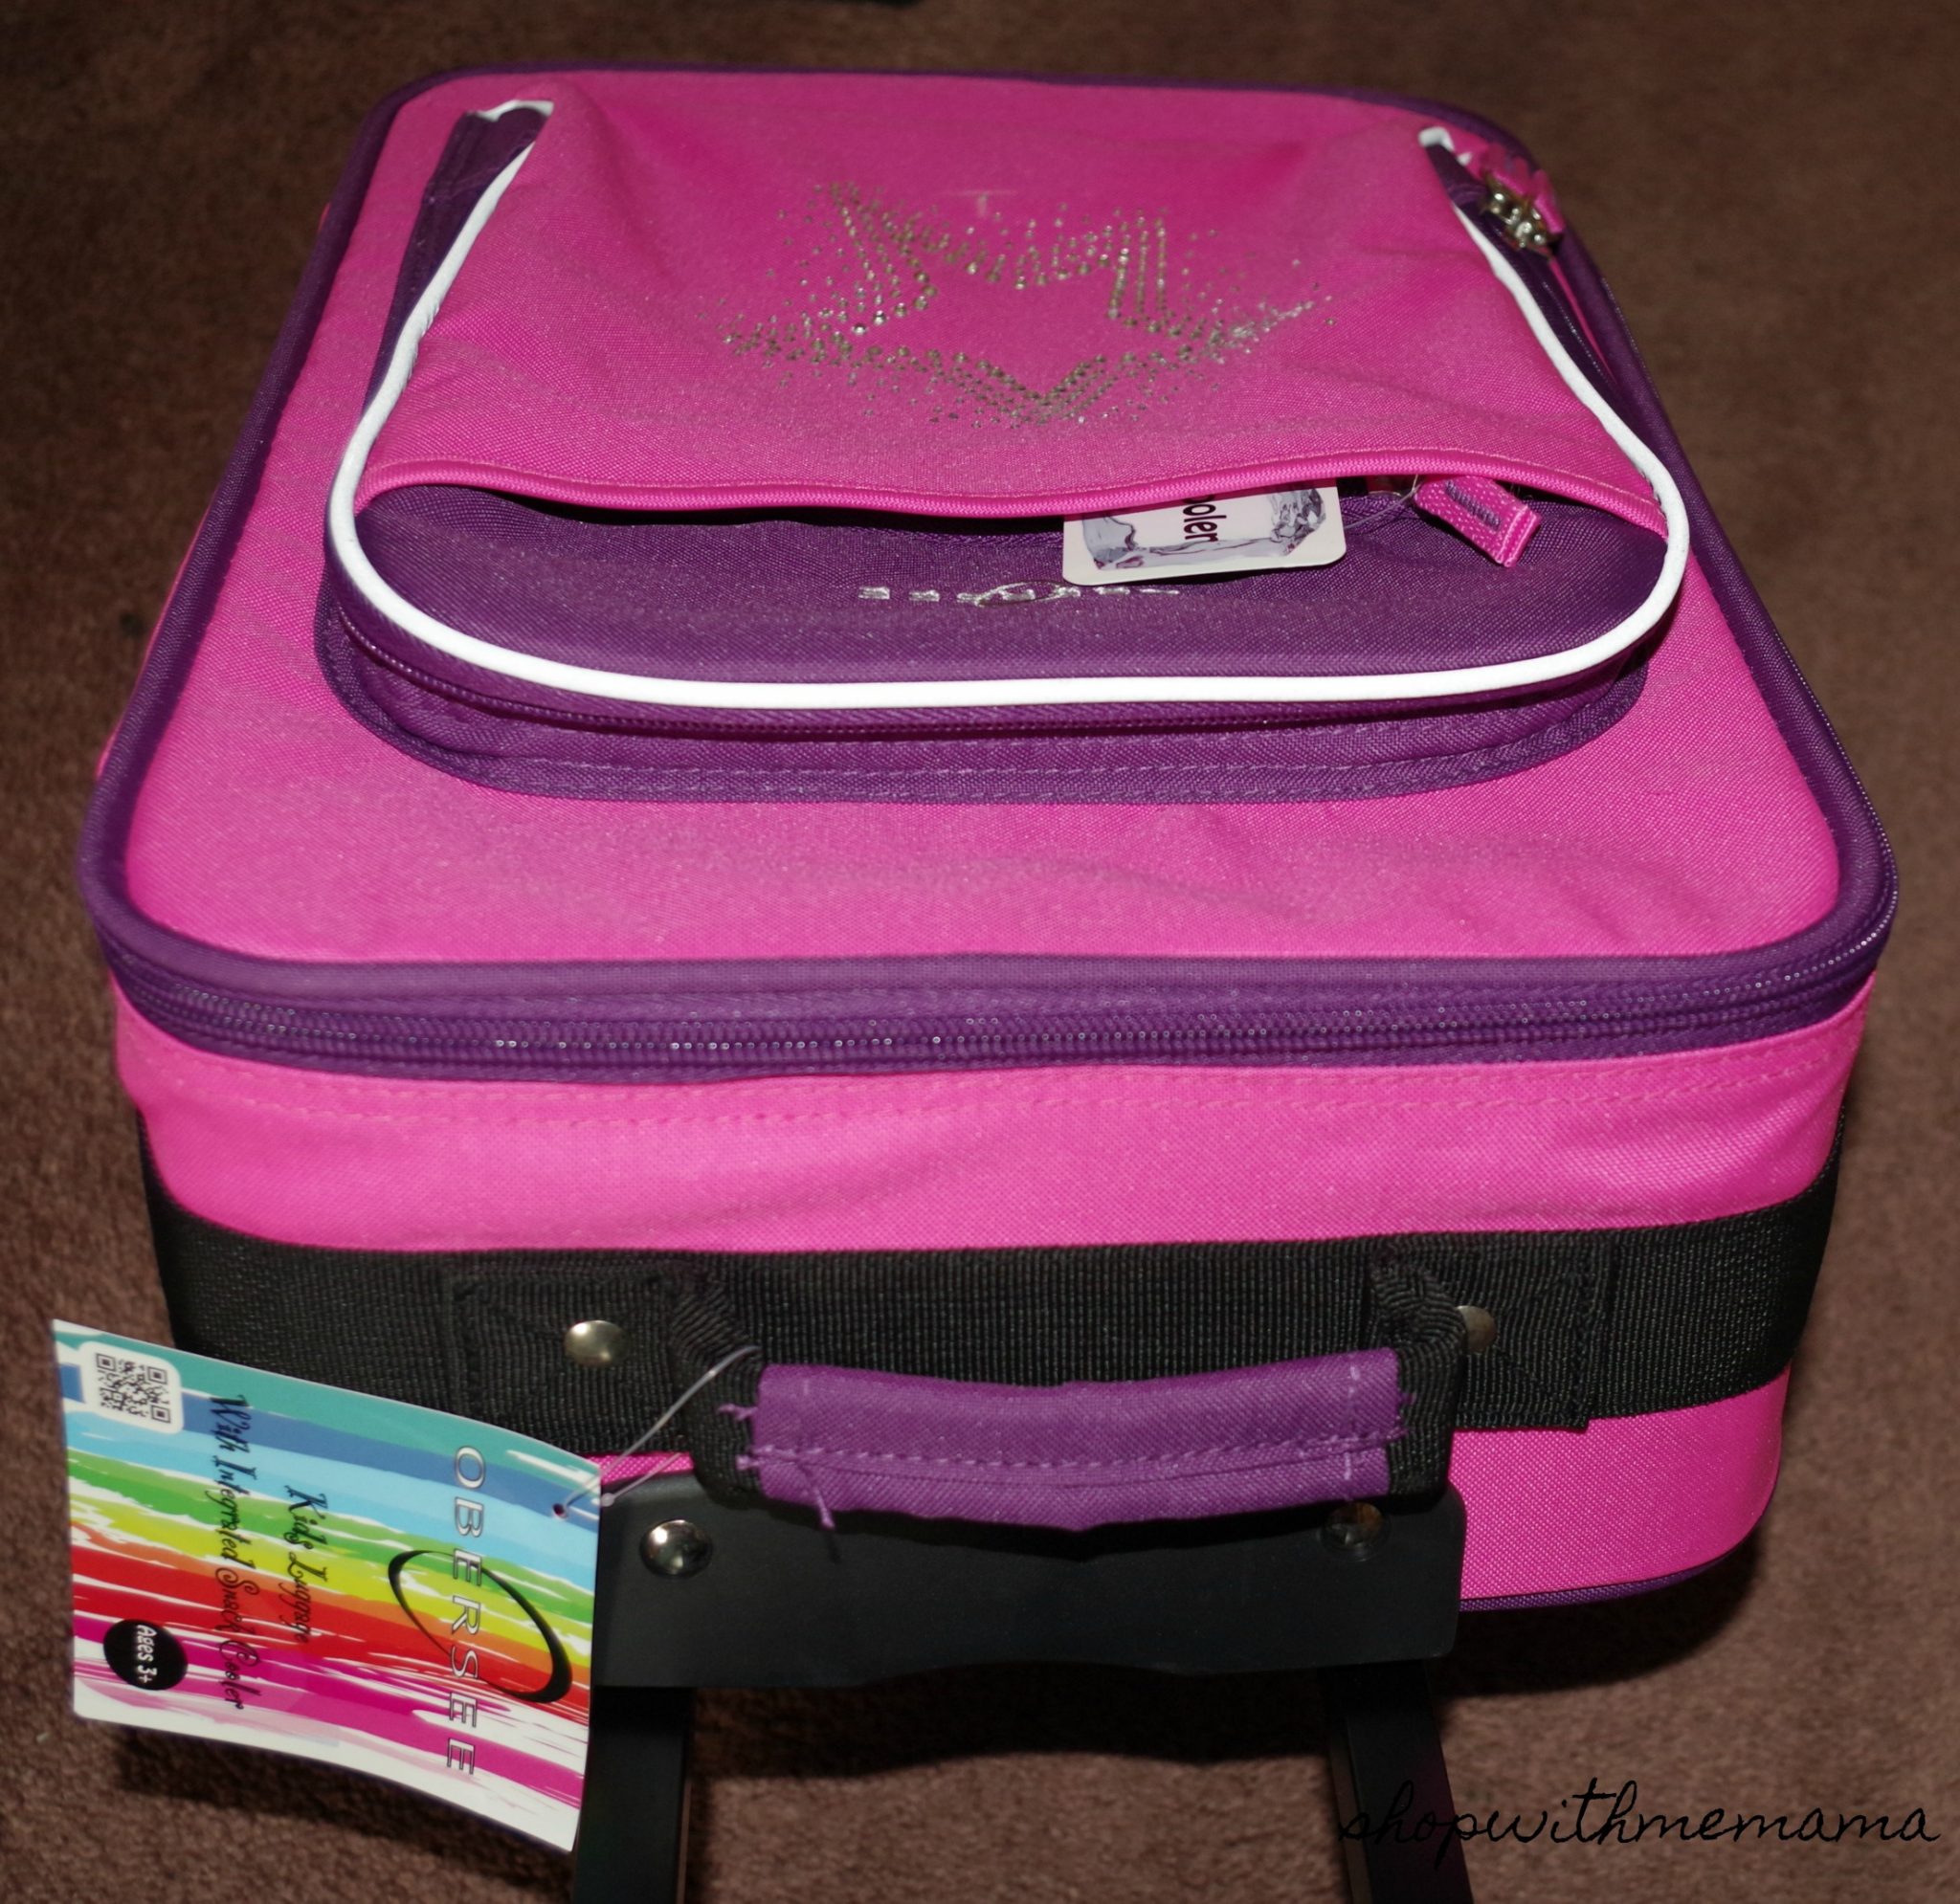 Obersee Kids Luggage Makes Traveling With Kids Fun